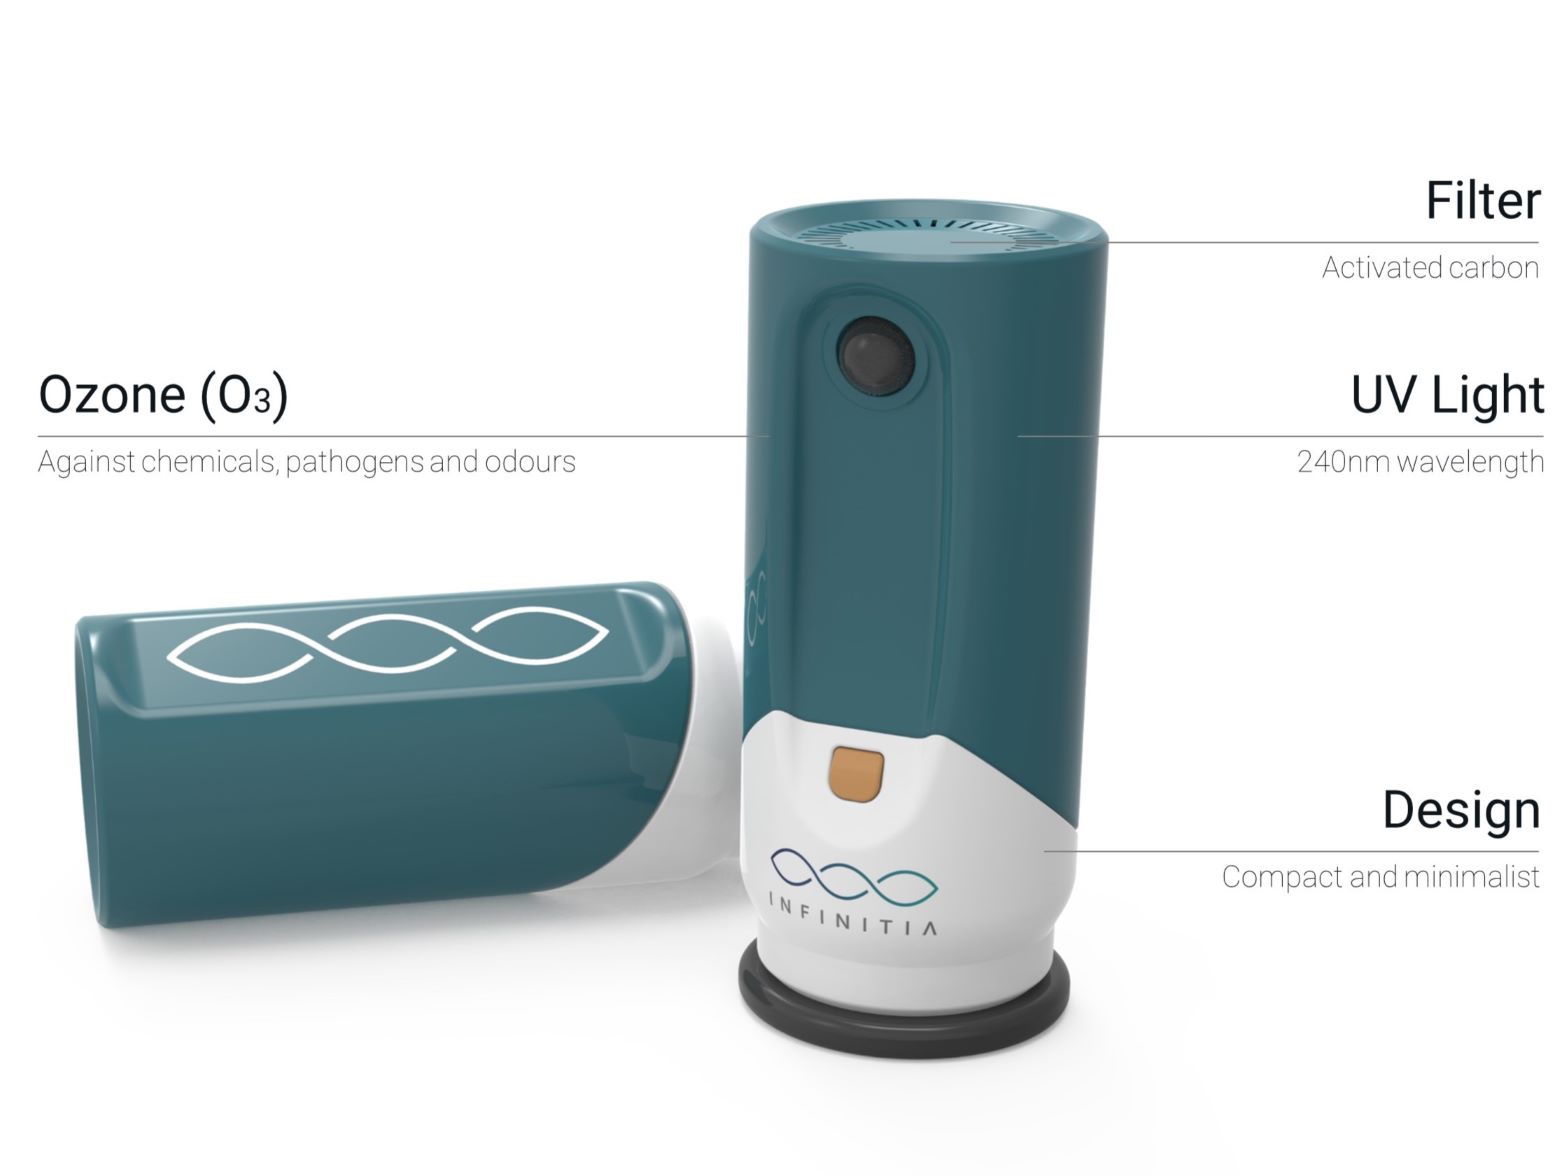 Design and Development of a New Air Purifying Device